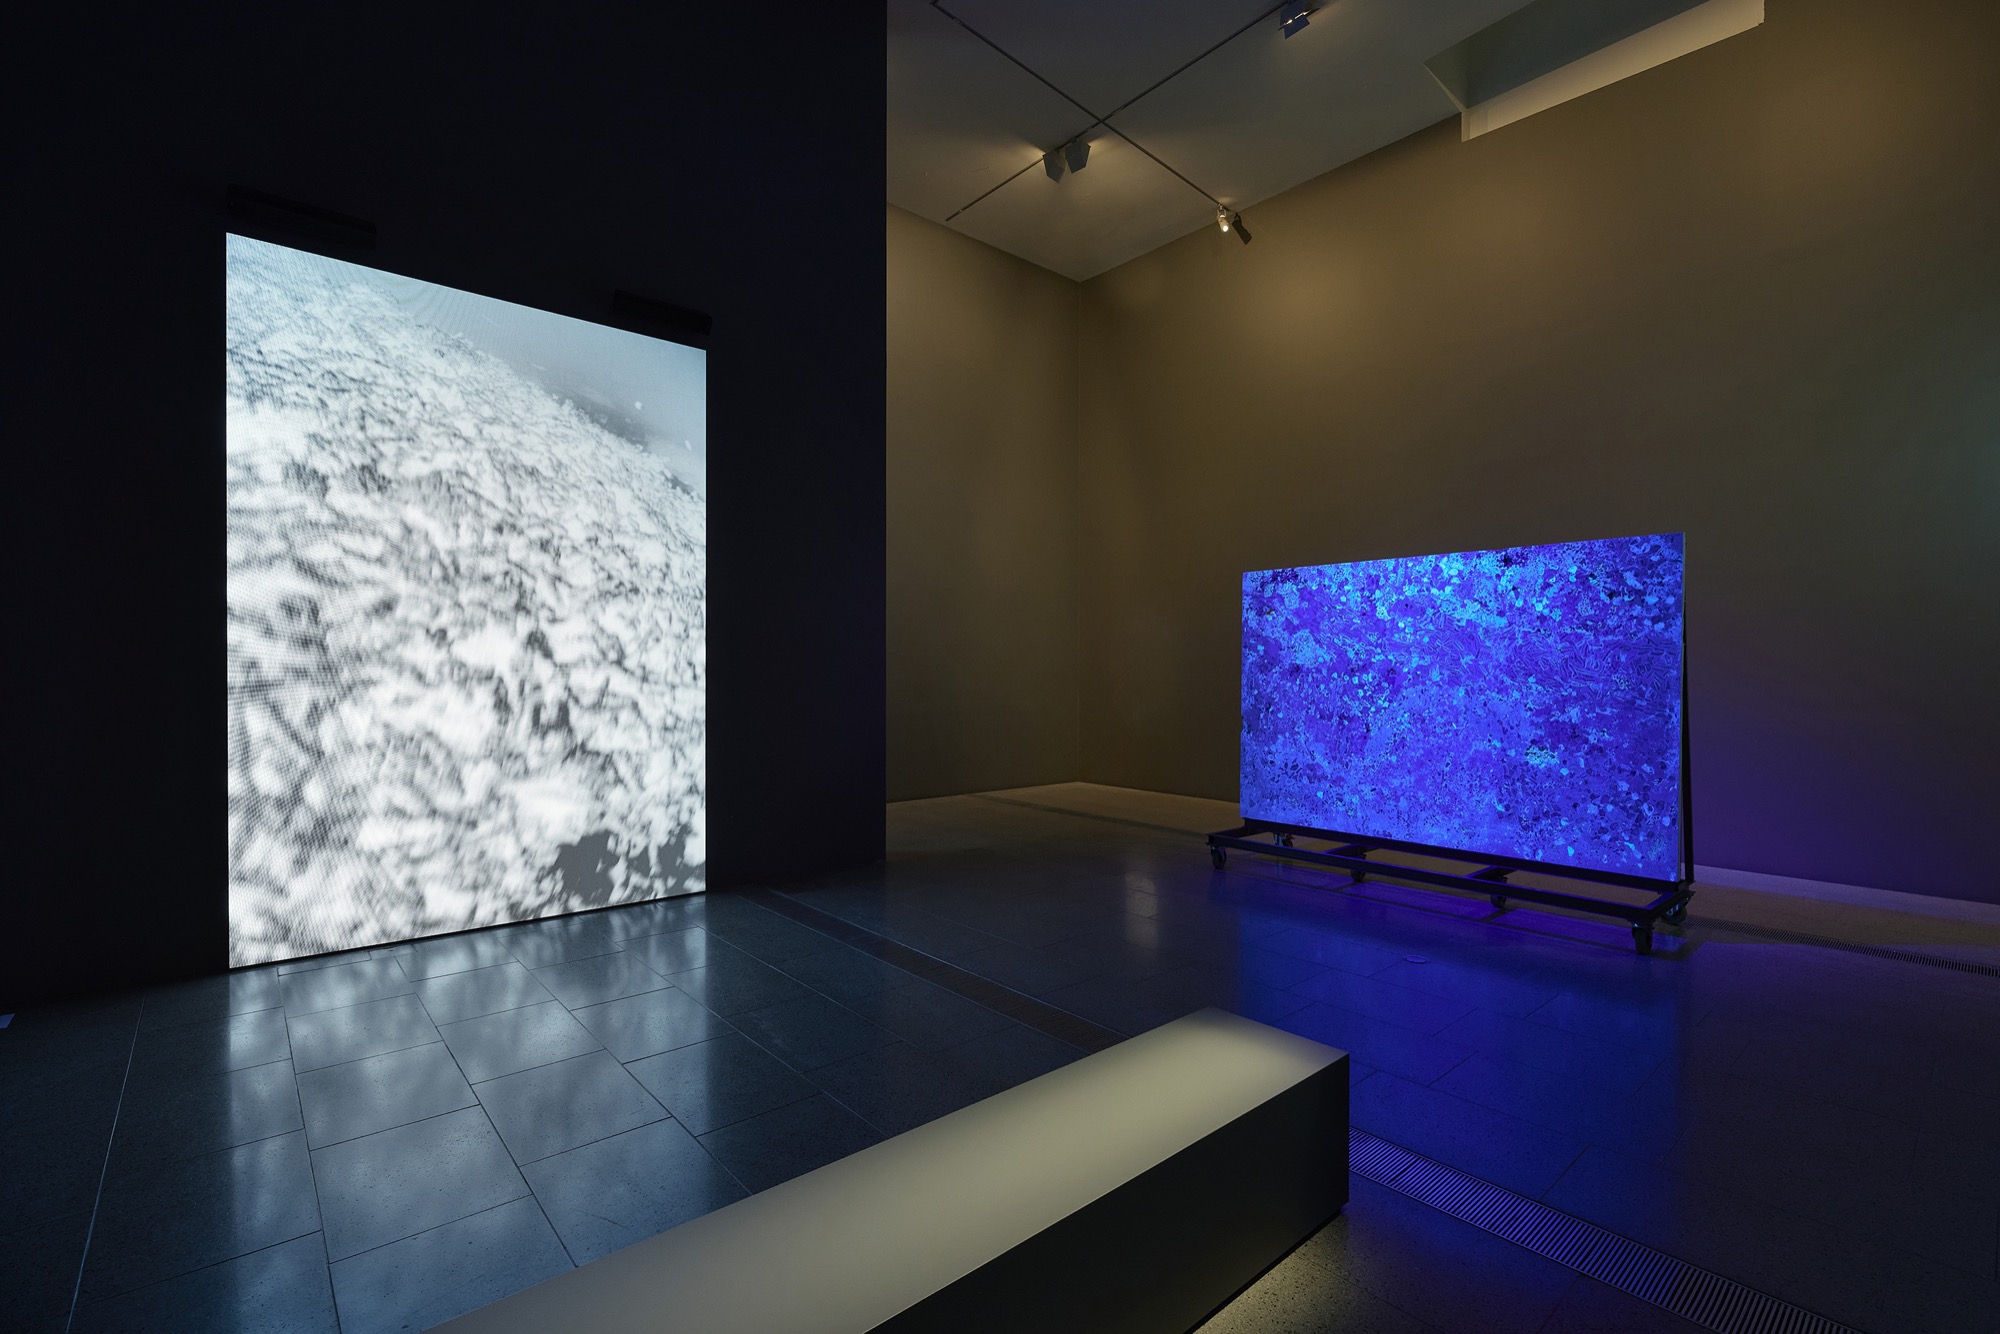 Installation view of Nicholas Mangan’s <em>Core Coralations</em> (2023) on display as part of the Melbourne Now exhibition at The Ian Potter Centre: NGV Australia, Melbourne from 24 March to 20 August 2023. Photo: Sean Fennessy